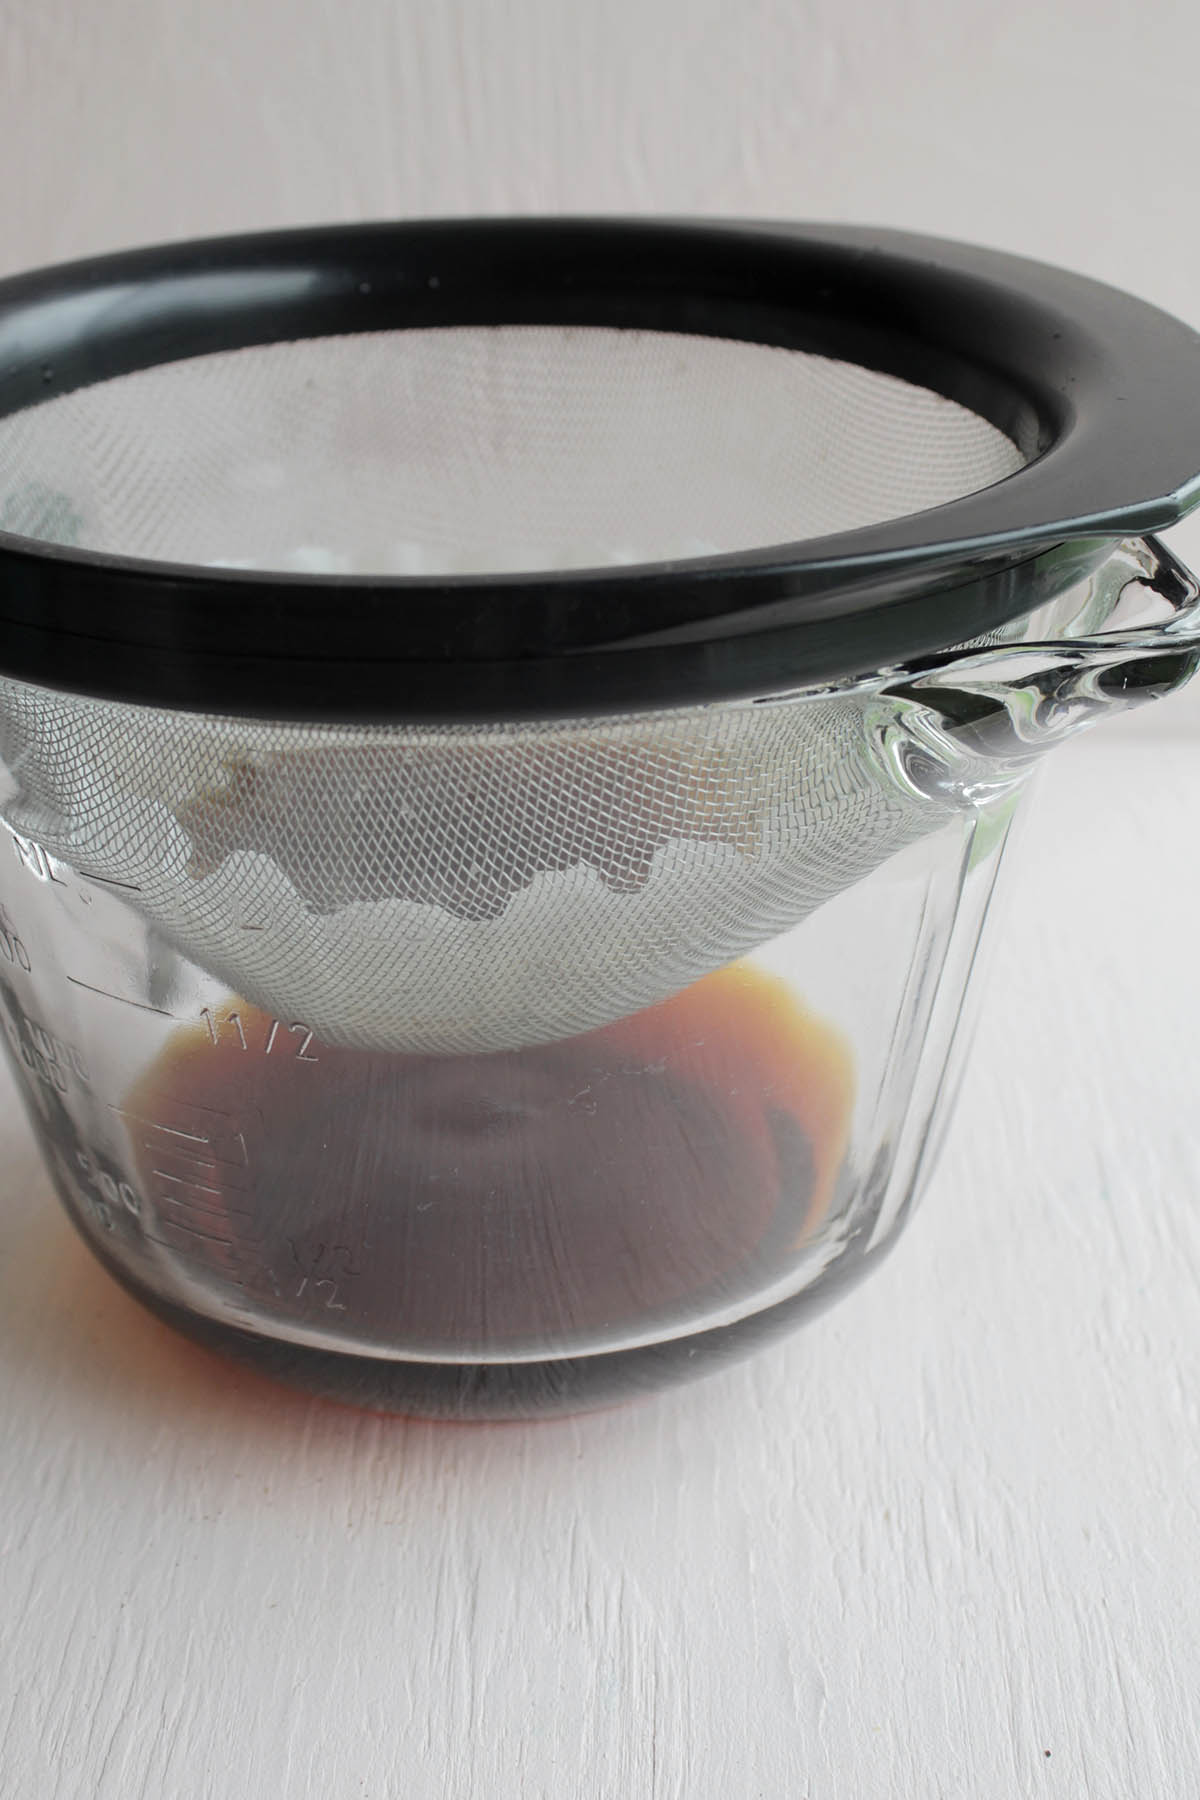 cold brew coffee draining into glass measuring cup